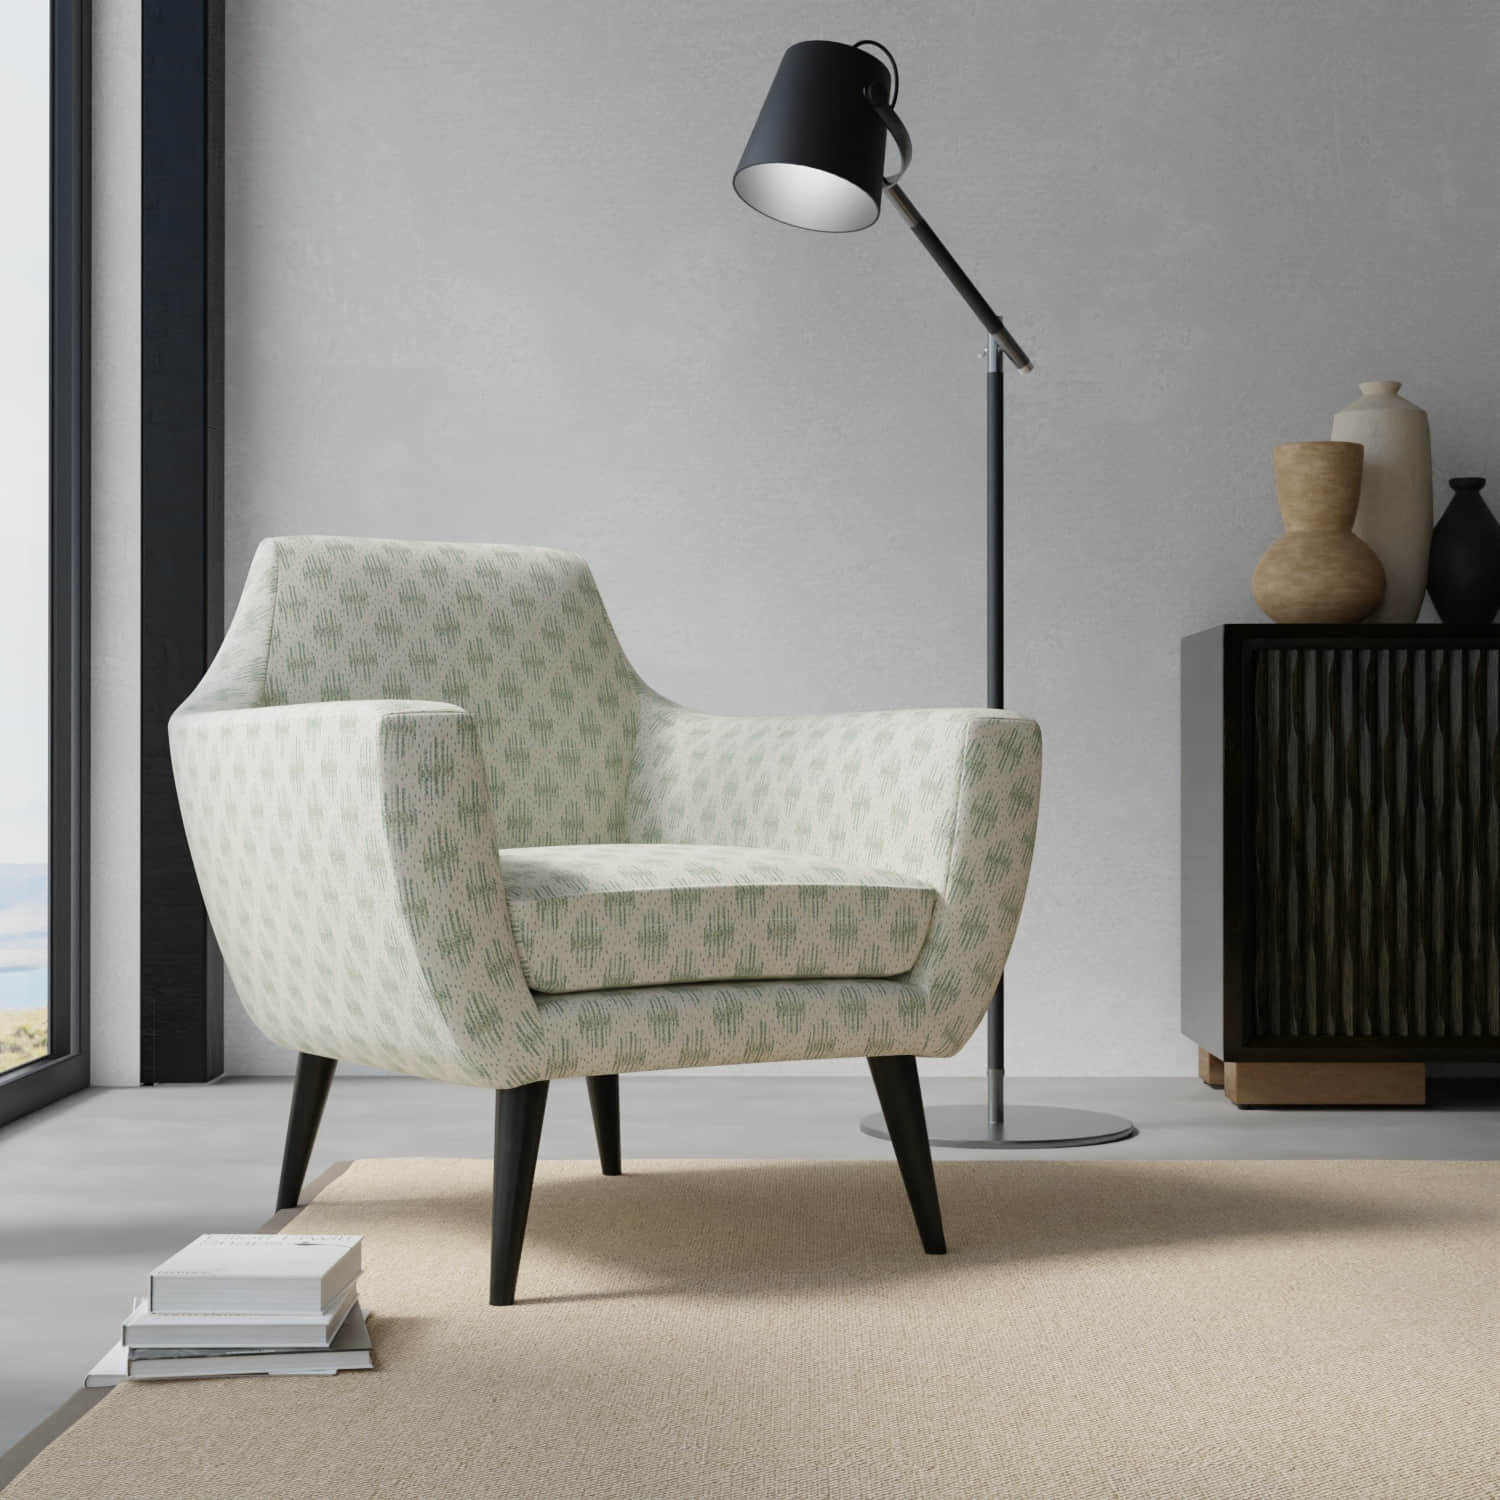 Bourne Tranquil upholstered on a contemporary chair